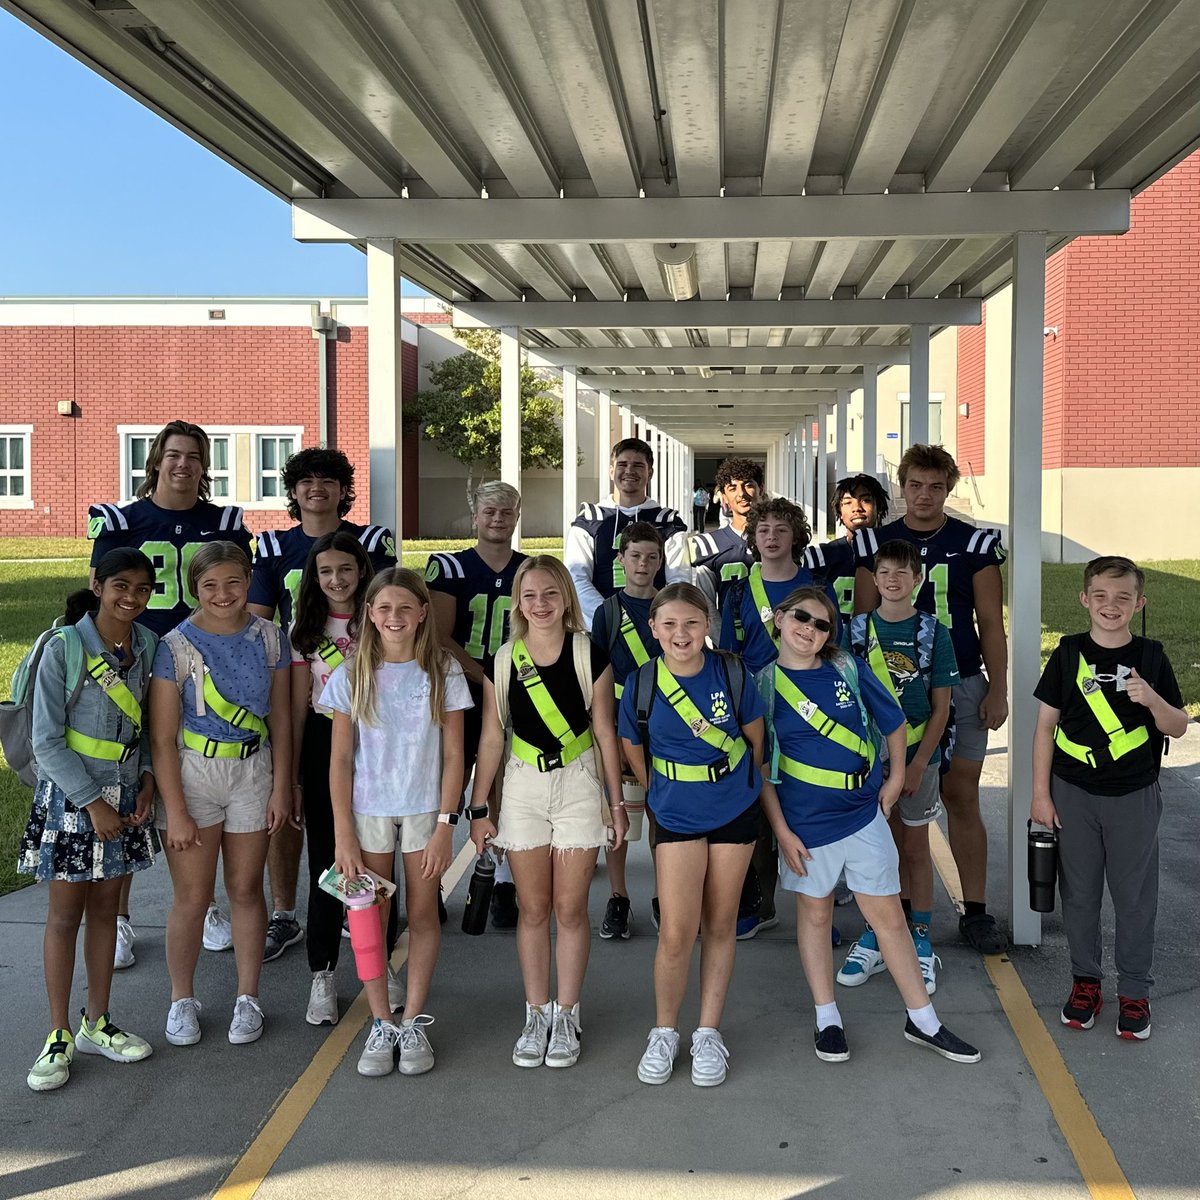 From the field to the car line, these young leaders are making a difference as positive role models in our community! Seeing the smiles on the faces of LPA students as our guys greeted them with cheer this morning was awesome! #BeachsideMade #BarracudaNation #LetsGetlt